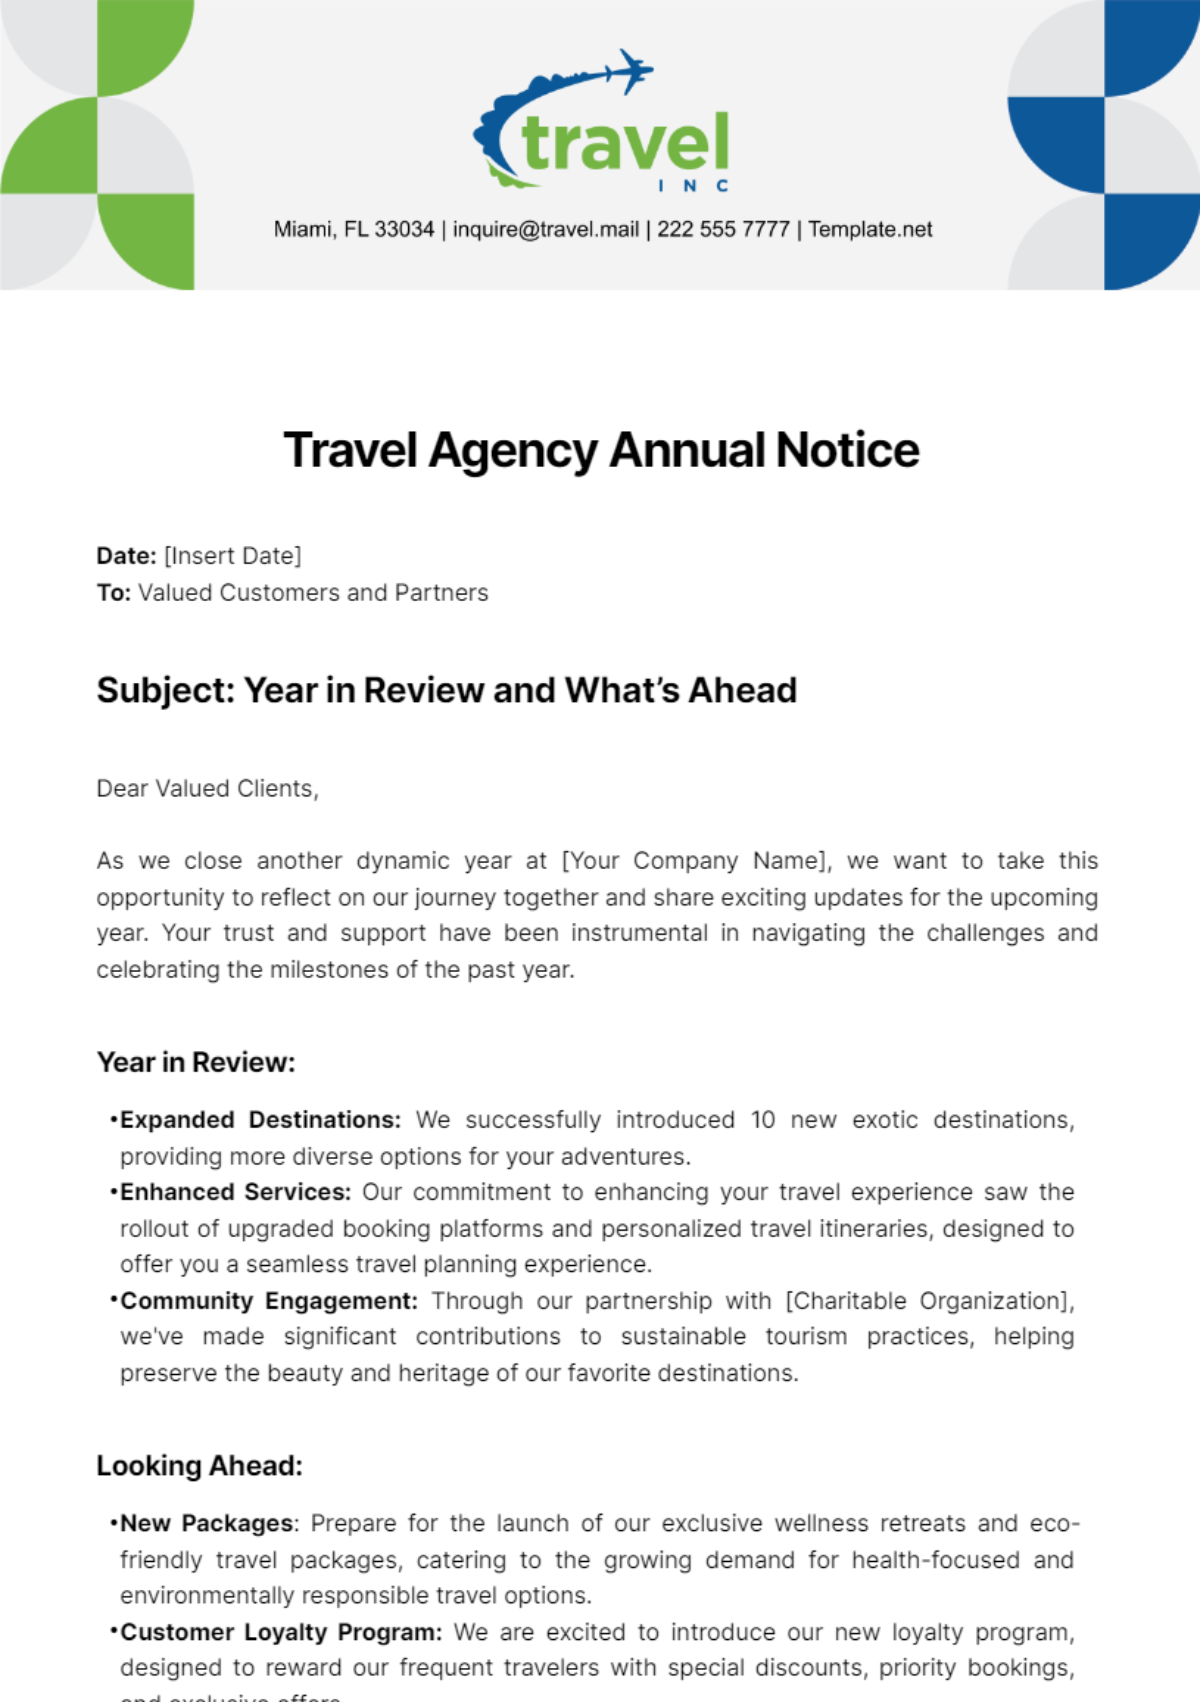 Free Travel Agency Annual Notice Template